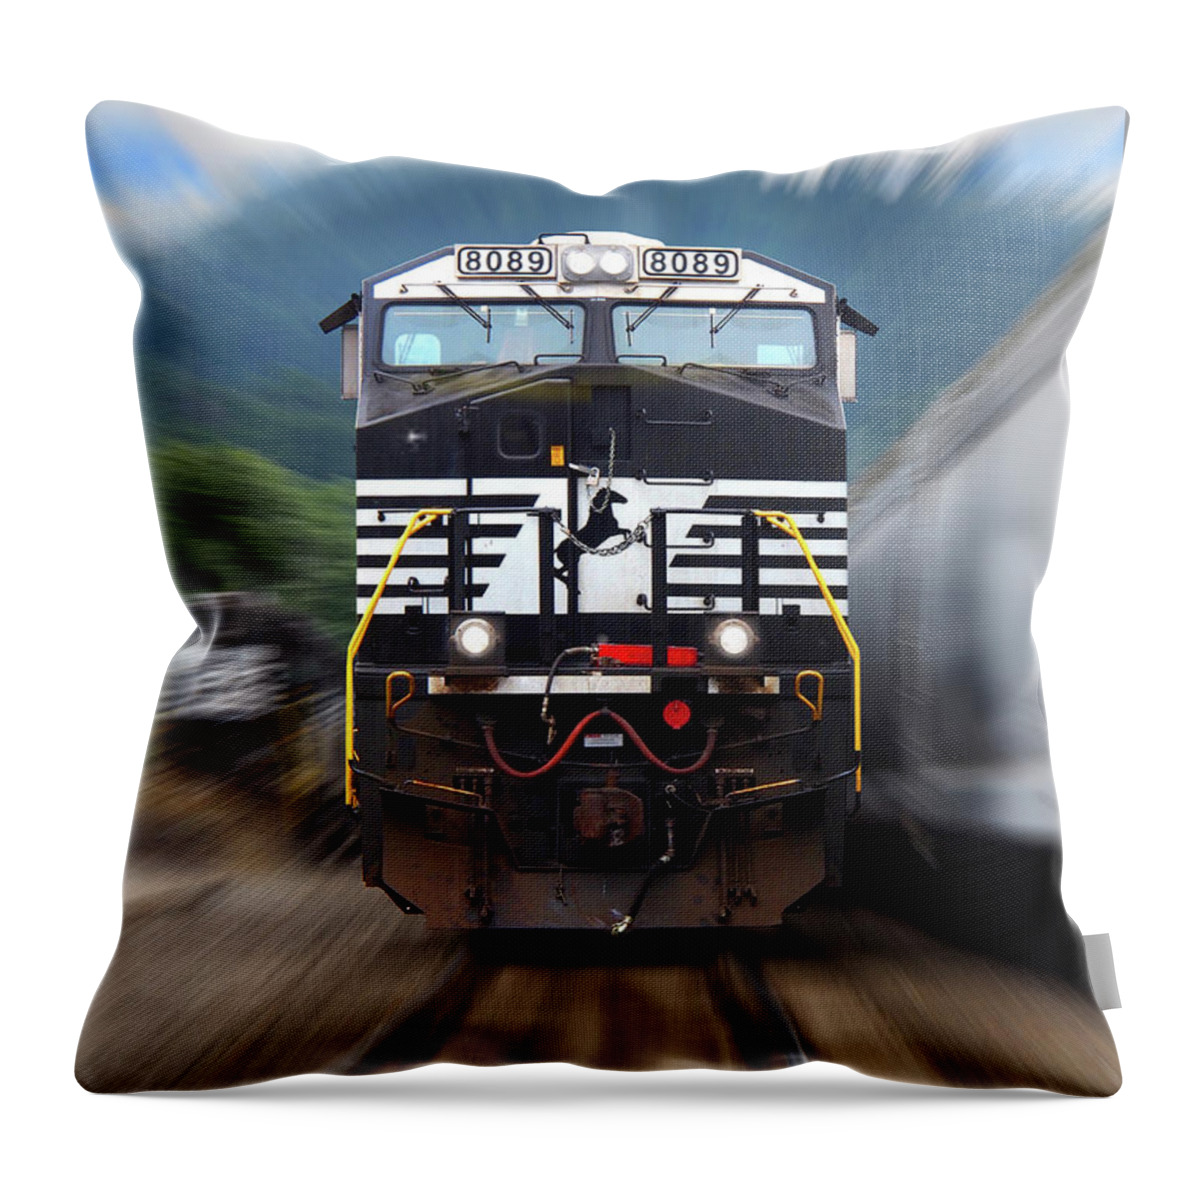 Railroad Throw Pillow featuring the photograph N S 8089 On The Move by Mike McGlothlen